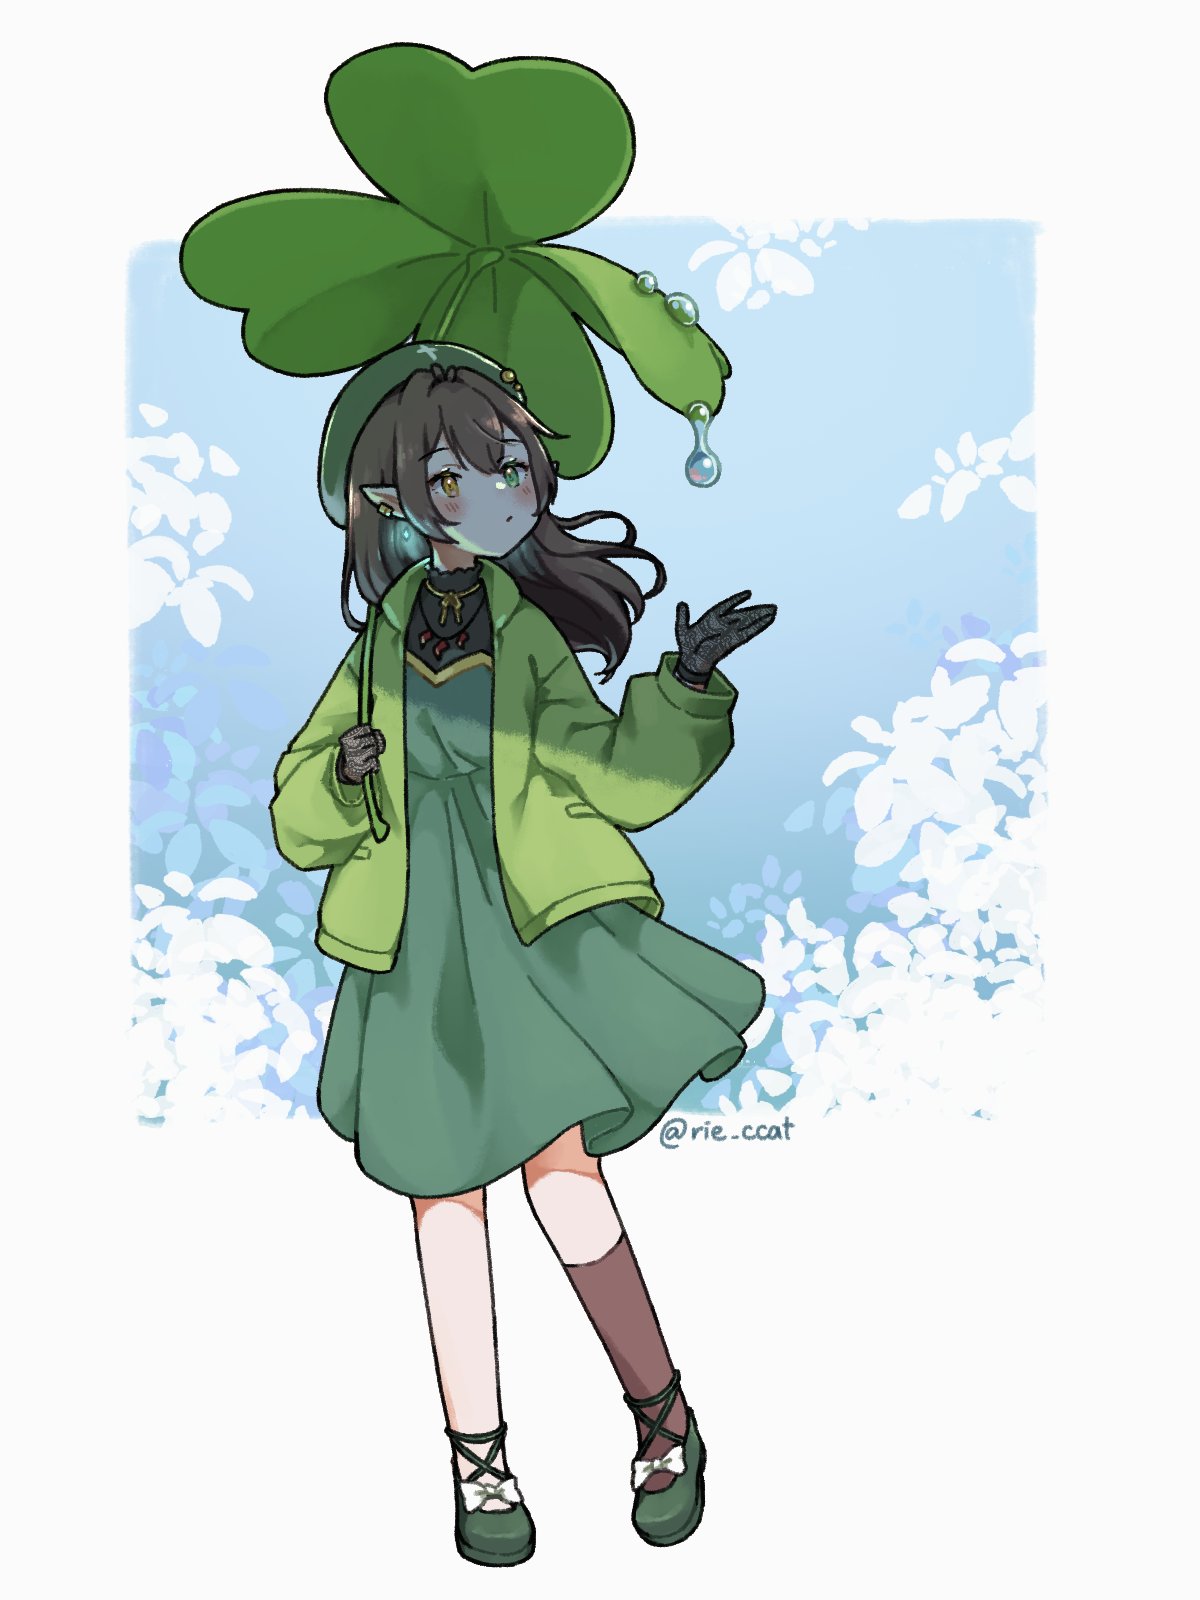 bow bowtie brown_hair clover dress four-leaf_clover gloves green_dress green_footwear green_jacket highres hojo_studio holding holding_umbrella jacket leaf_umbrella long_hair looking_to_the_side monochrome pointy_ears rie_ccat shoes sim_chan umbrella virtual_youtuber water_drop white_bow white_bowtie